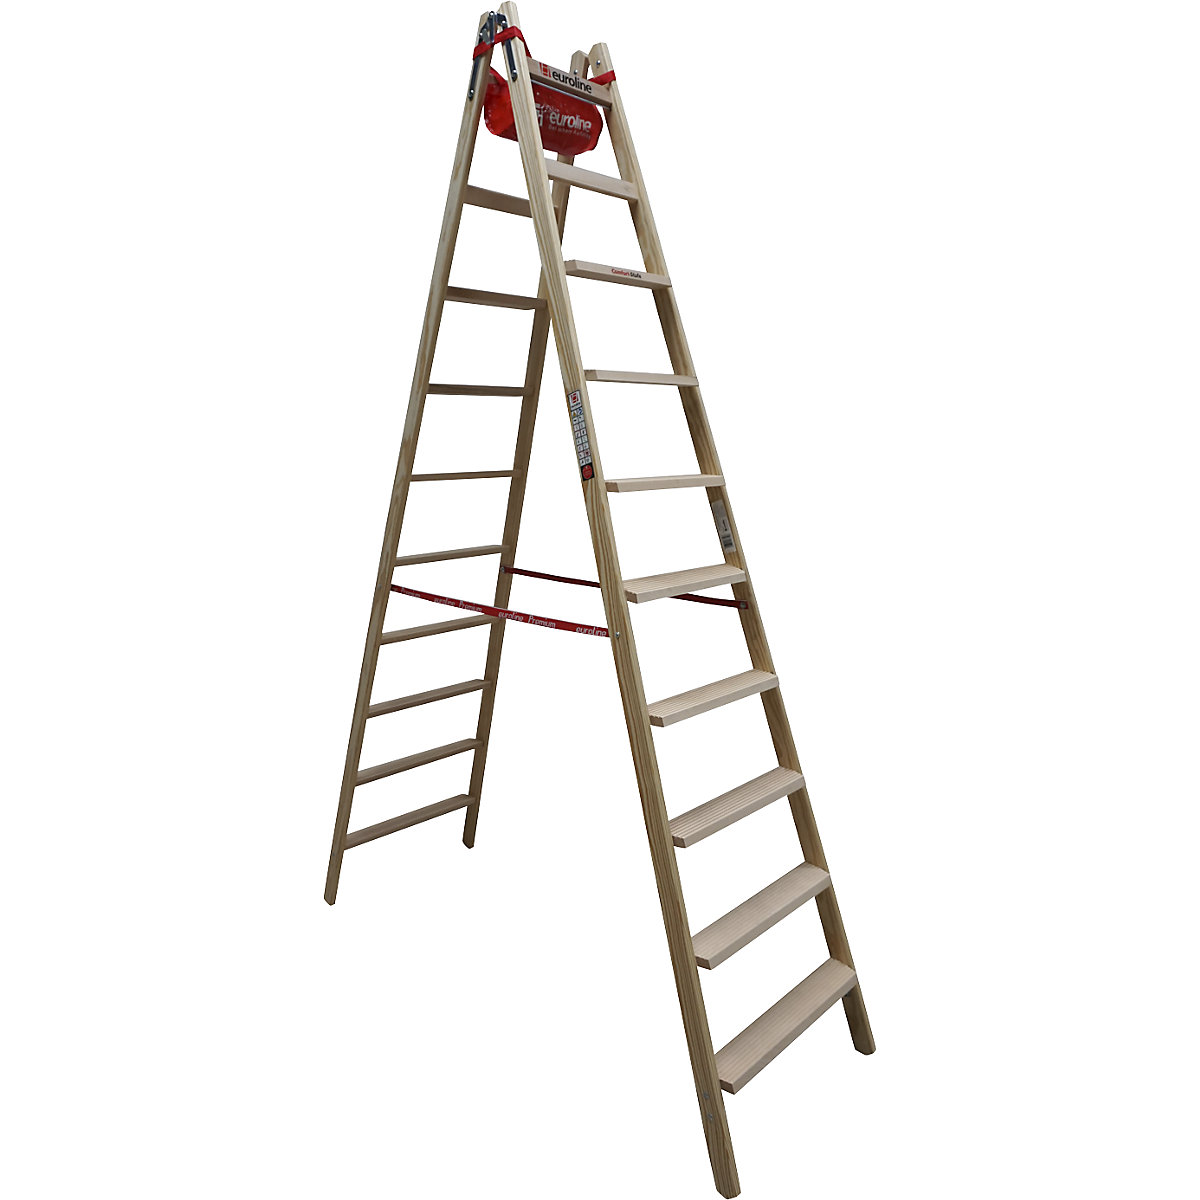 Wooden step ladder with comfort steps – euroline, double sided access, 2 x 10 steps-1